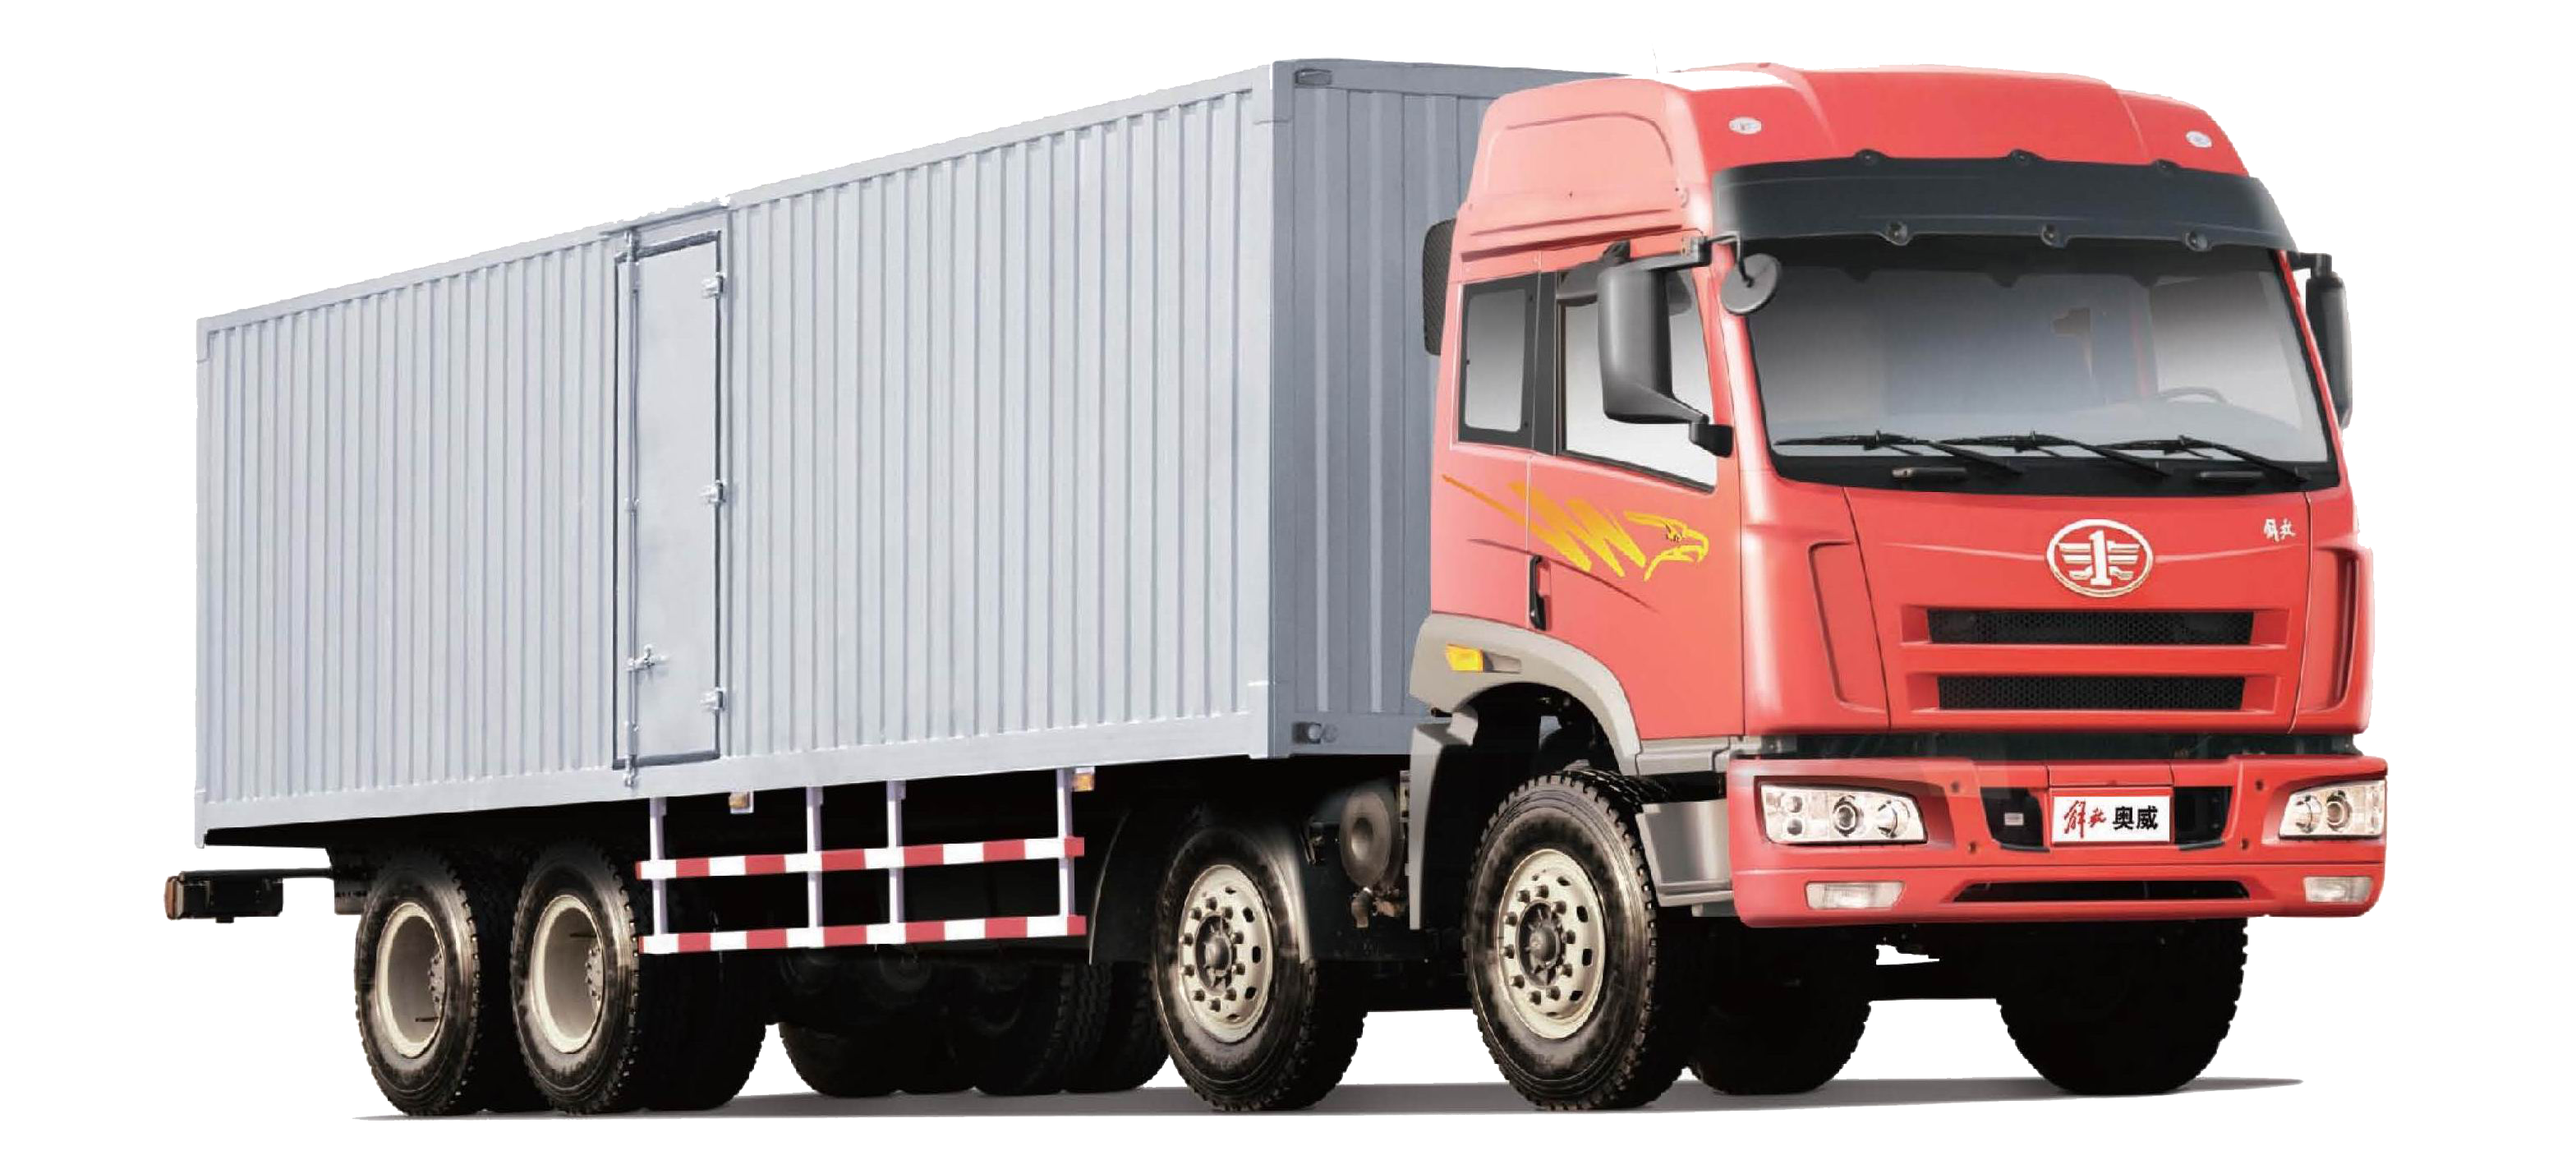 Cargo Truck PNG, Lorry PNG HD - Free PNG